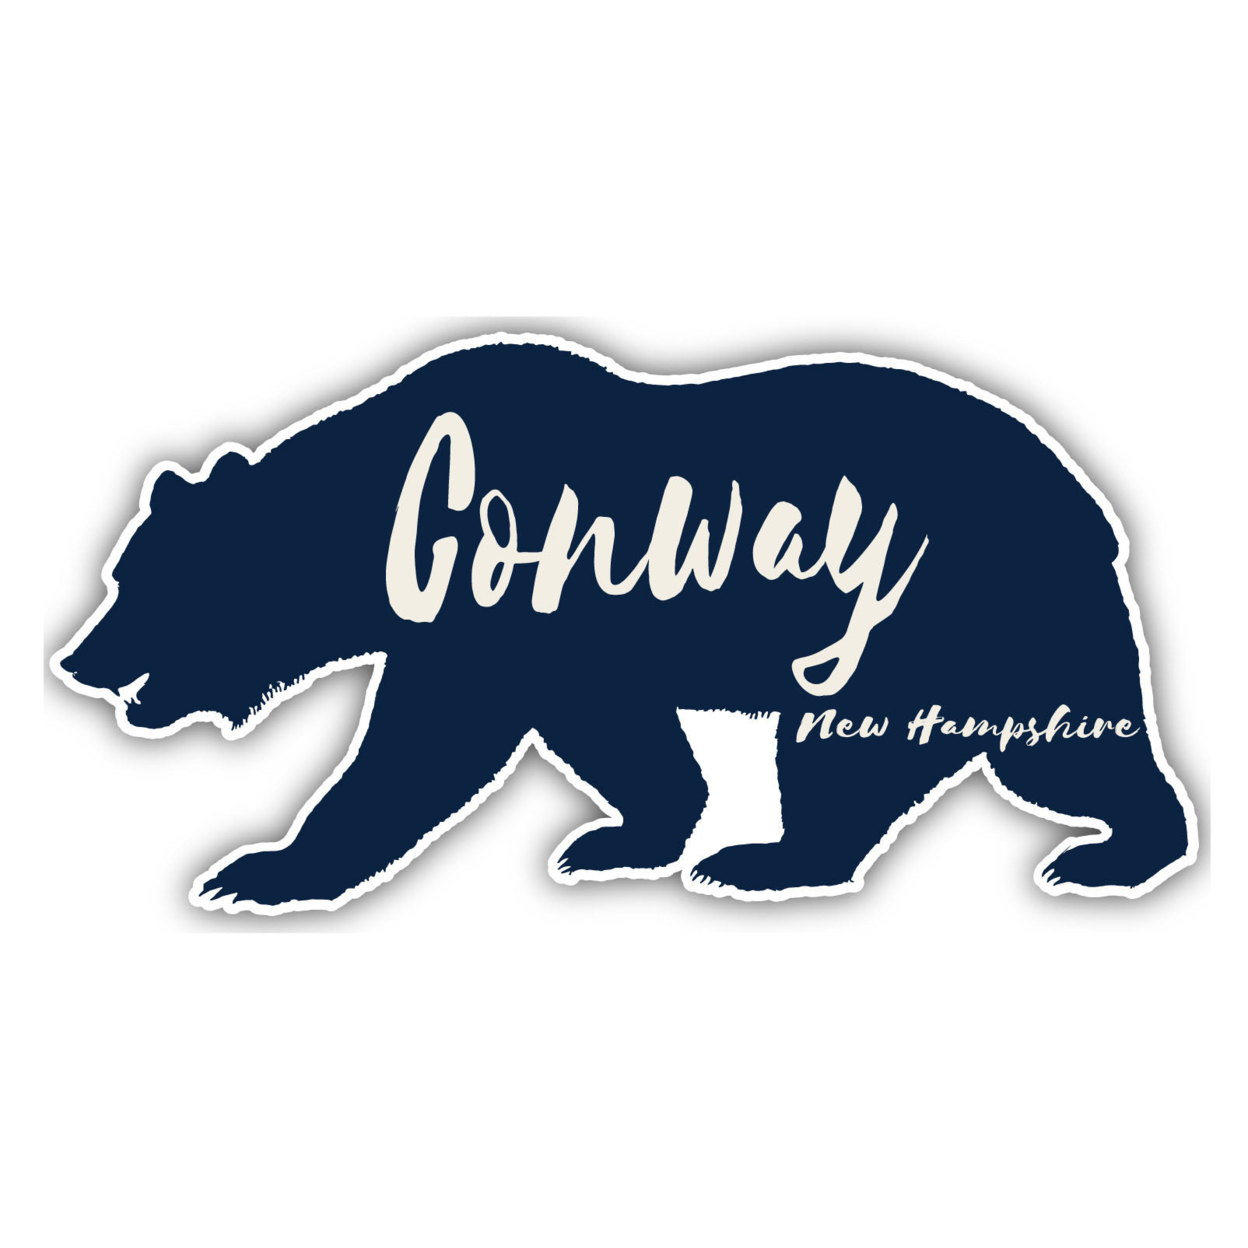 Conway New Hampshire Souvenir Decorative Stickers (Choose Theme And Size) - 4-Pack, 10-Inch, Bear